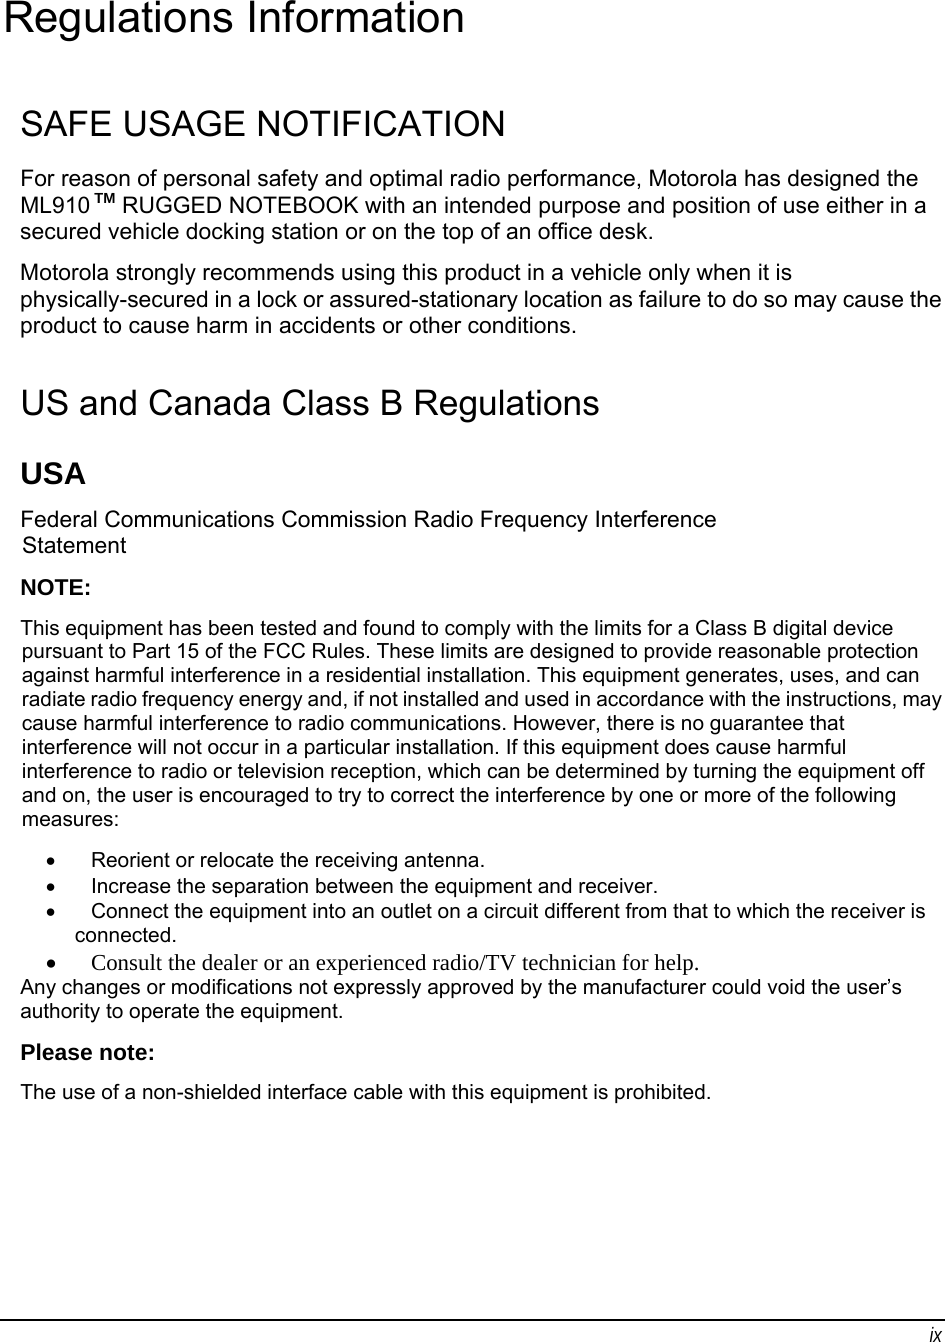 ix Regulations Information SAFE USAGE NOTIFICATION For reason of personal safety and optimal radio performance, Motorola has designed the ML910 TM RUGGED NOTEBOOK with an intended purpose and position of use either in a secured vehicle docking station or on the top of an office desk. Motorola strongly recommends using this product in a vehicle only when it is physically-secured in a lock or assured-stationary location as failure to do so may cause the product to cause harm in accidents or other conditions. US and Canada Class B Regulations USA Federal Communications Commission Radio Frequency Interference Statement NOTE: This equipment has been tested and found to comply with the limits for a Class B digital device pursuant to Part 15 of the FCC Rules. These limits are designed to provide reasonable protection against harmful interference in a residential installation. This equipment generates, uses, and can radiate radio frequency energy and, if not installed and used in accordance with the instructions, may cause harmful interference to radio communications. However, there is no guarantee that interference will not occur in a particular installation. If this equipment does cause harmful interference to radio or television reception, which can be determined by turning the equipment off and on, the user is encouraged to try to correct the interference by one or more of the following measures: •  Reorient or relocate the receiving antenna. •  Increase the separation between the equipment and receiver. •  Connect the equipment into an outlet on a circuit different from that to which the receiver is connected. • Consult the dealer or an experienced radio/TV technician for help. Any changes or modifications not expressly approved by the manufacturer could void the user’s authority to operate the equipment. Please note: The use of a non-shielded interface cable with this equipment is prohibited. 